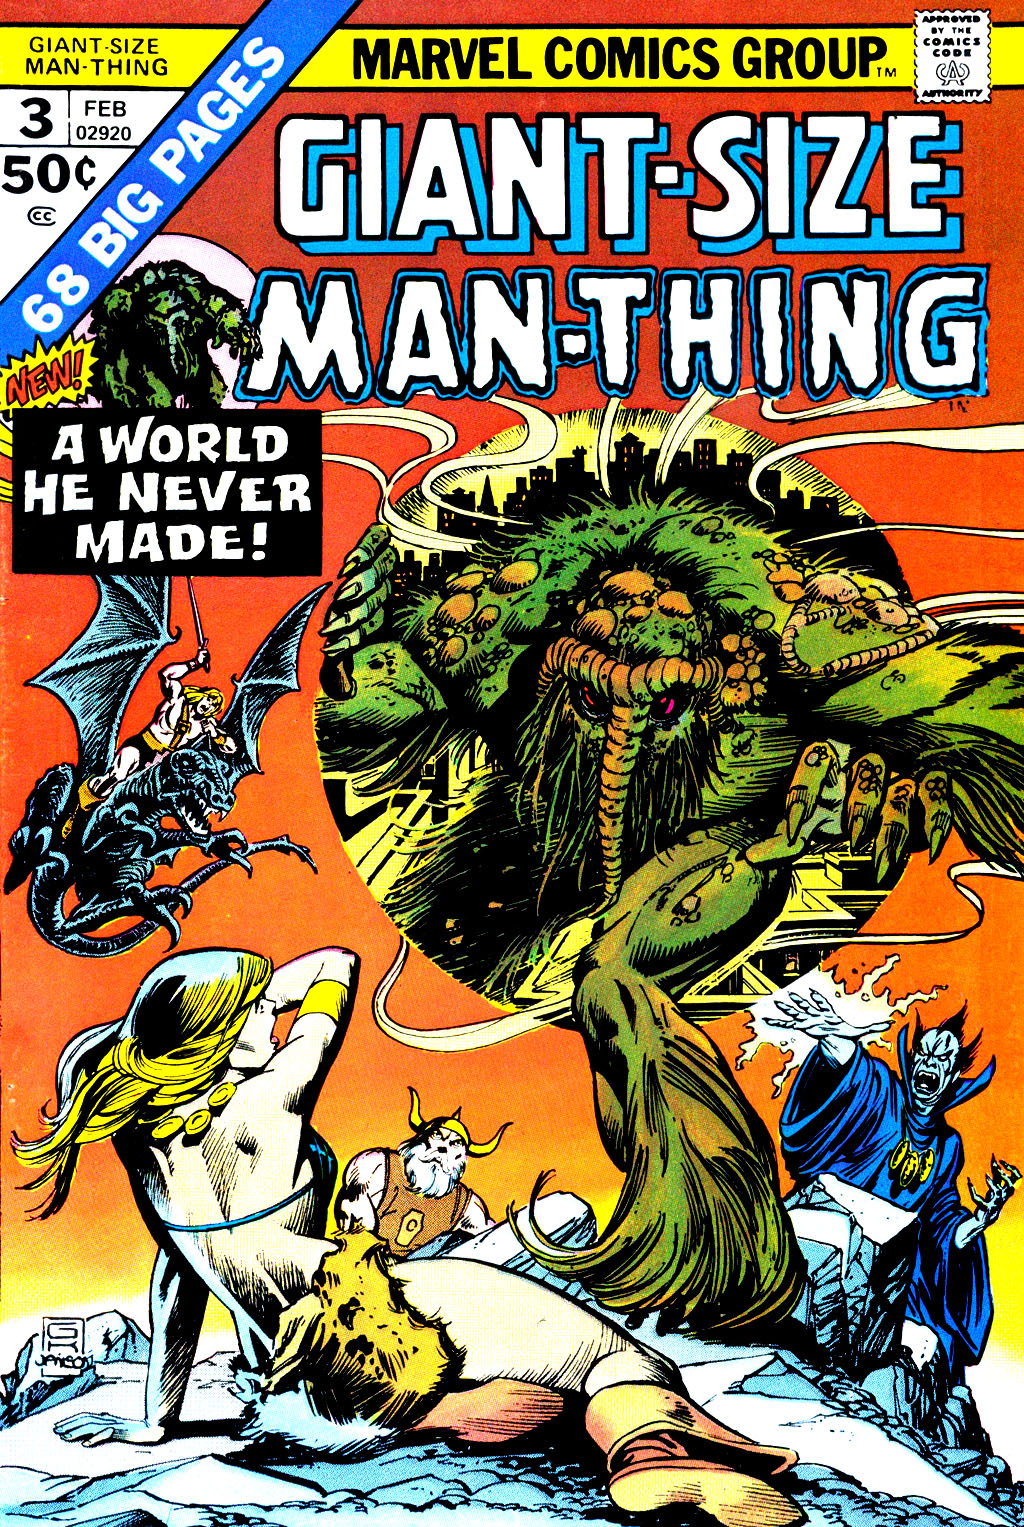 Read online Giant-Size Man-Thing comic -  Issue #3 - 1